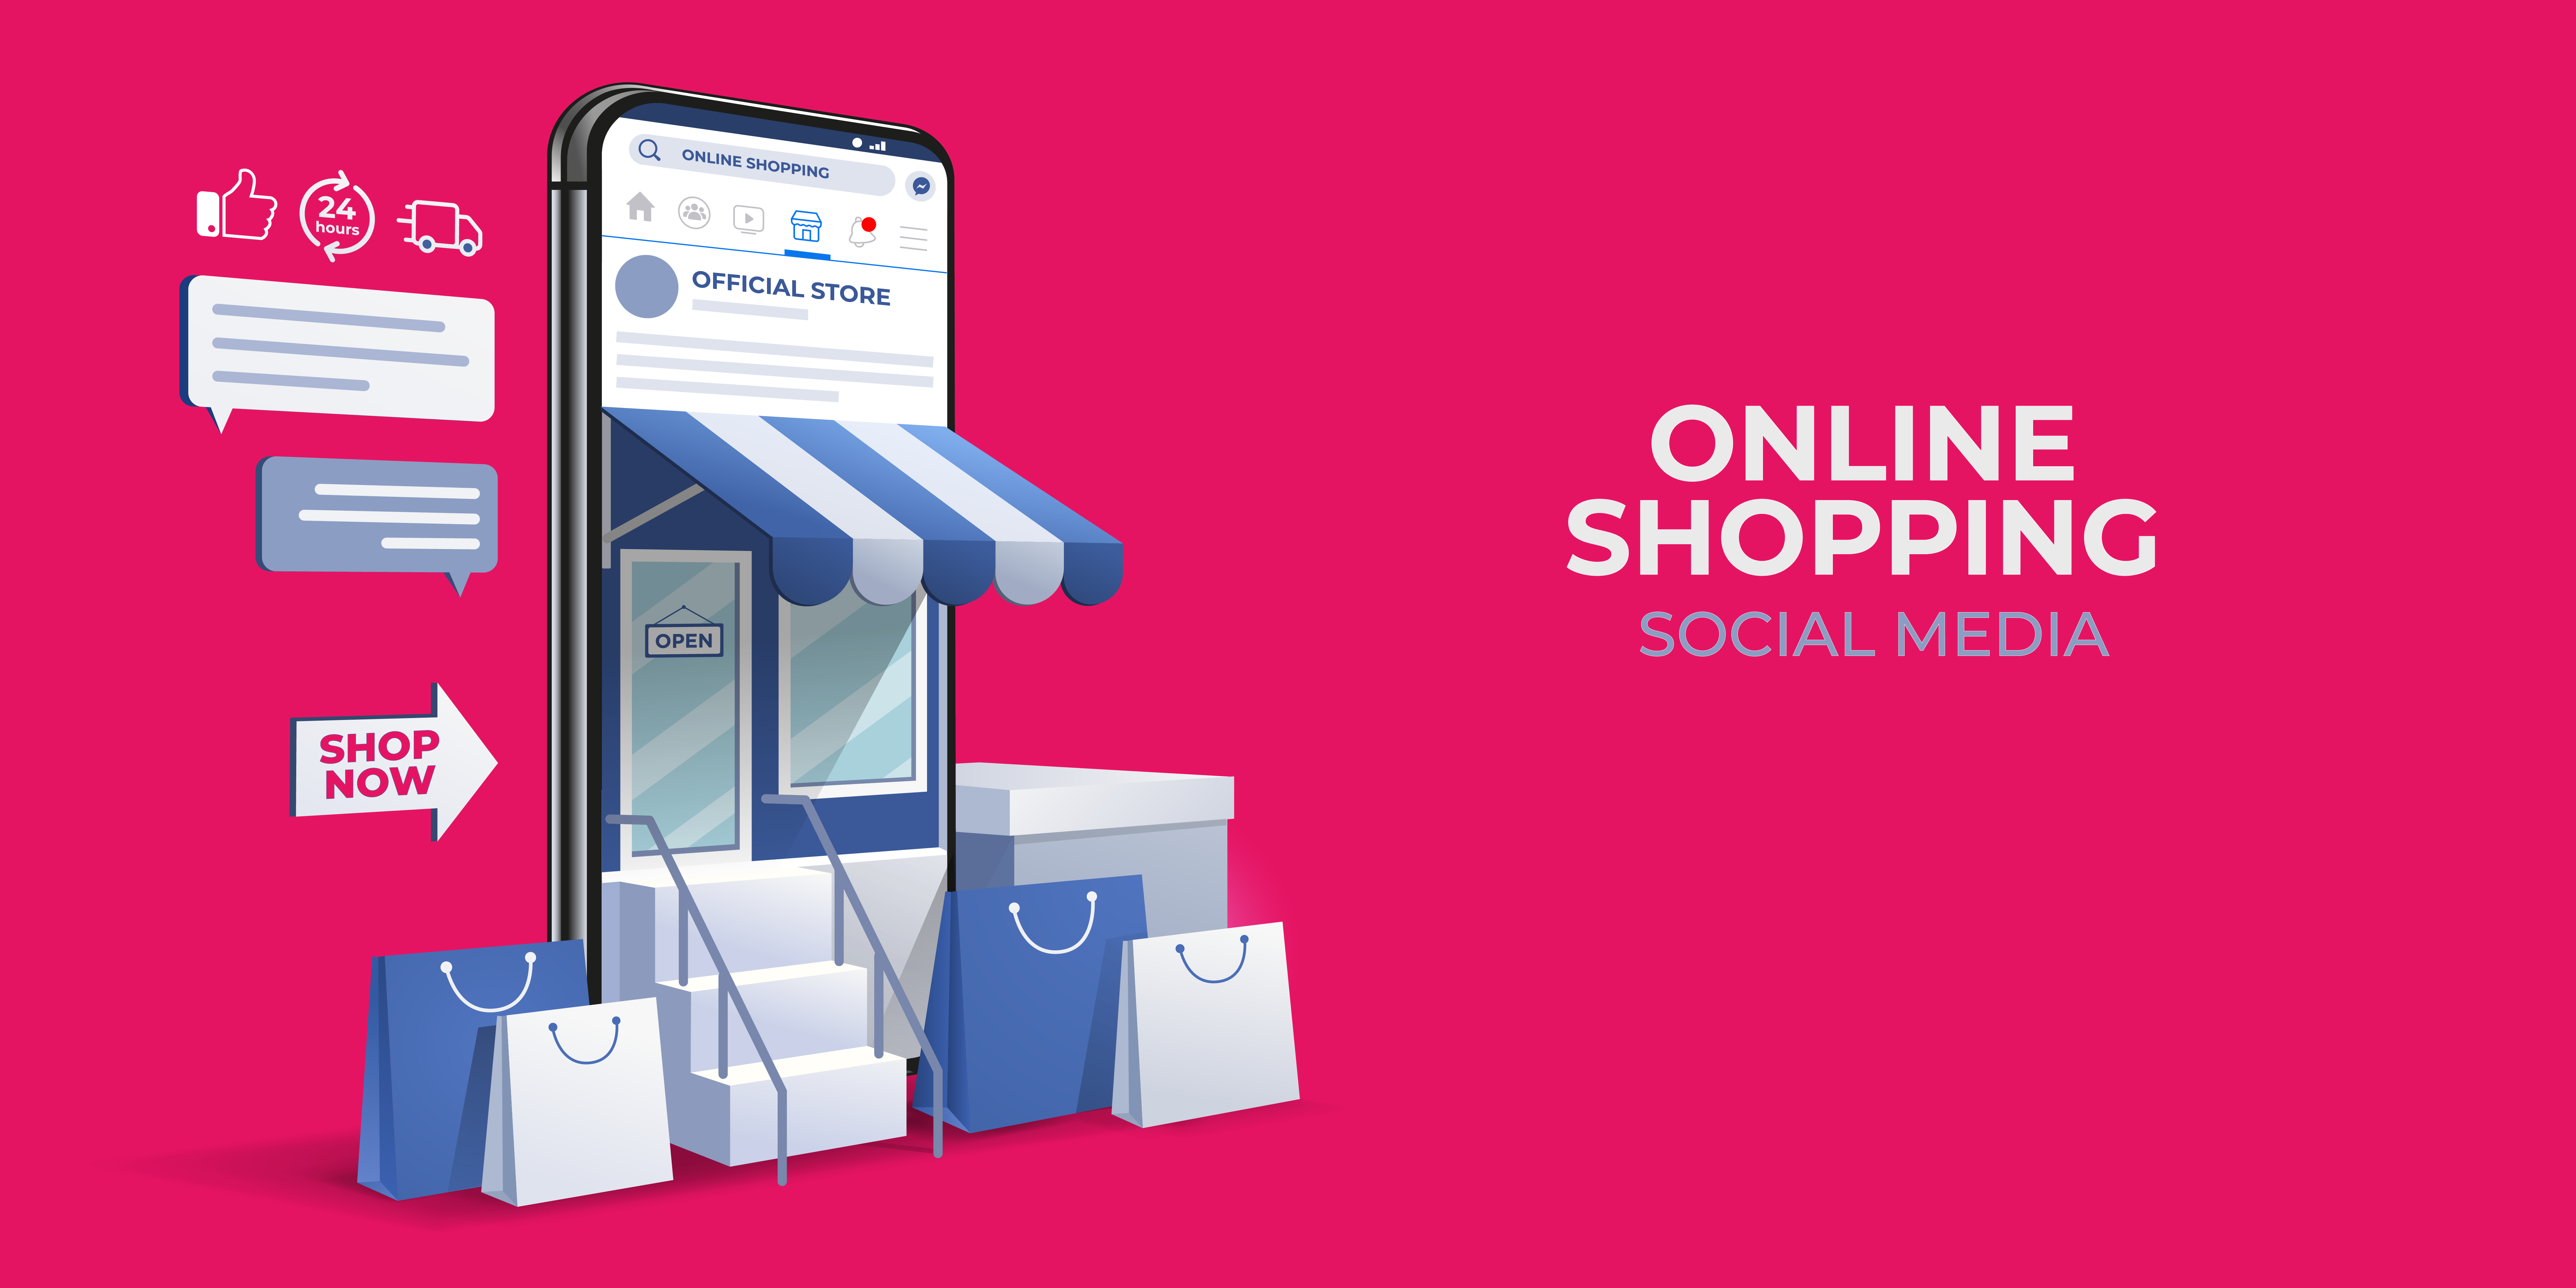 online shopping image with pink background